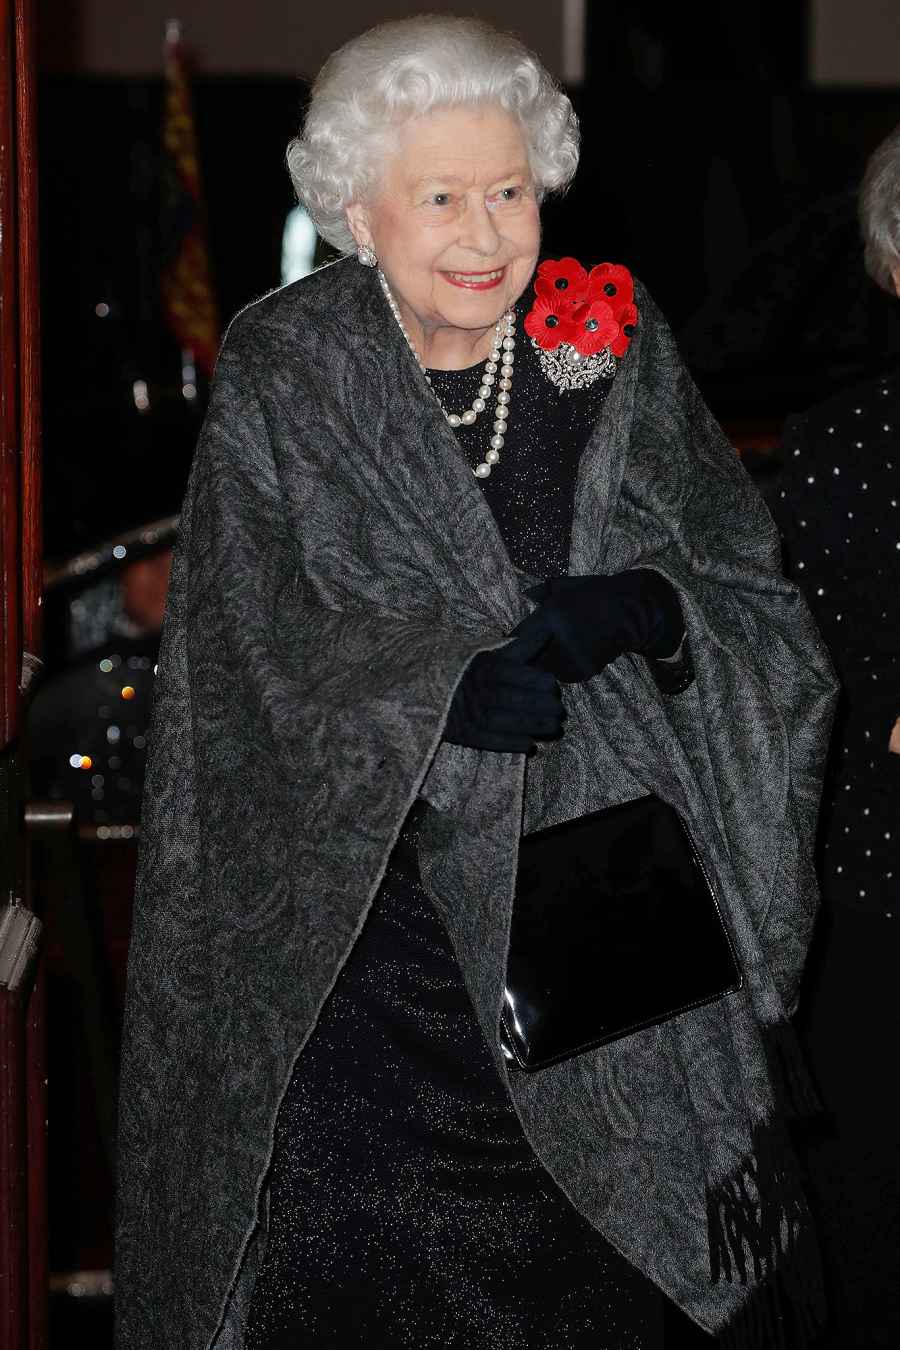 Queen Elizabeth II, Royal Family, Festival Of Remembrance